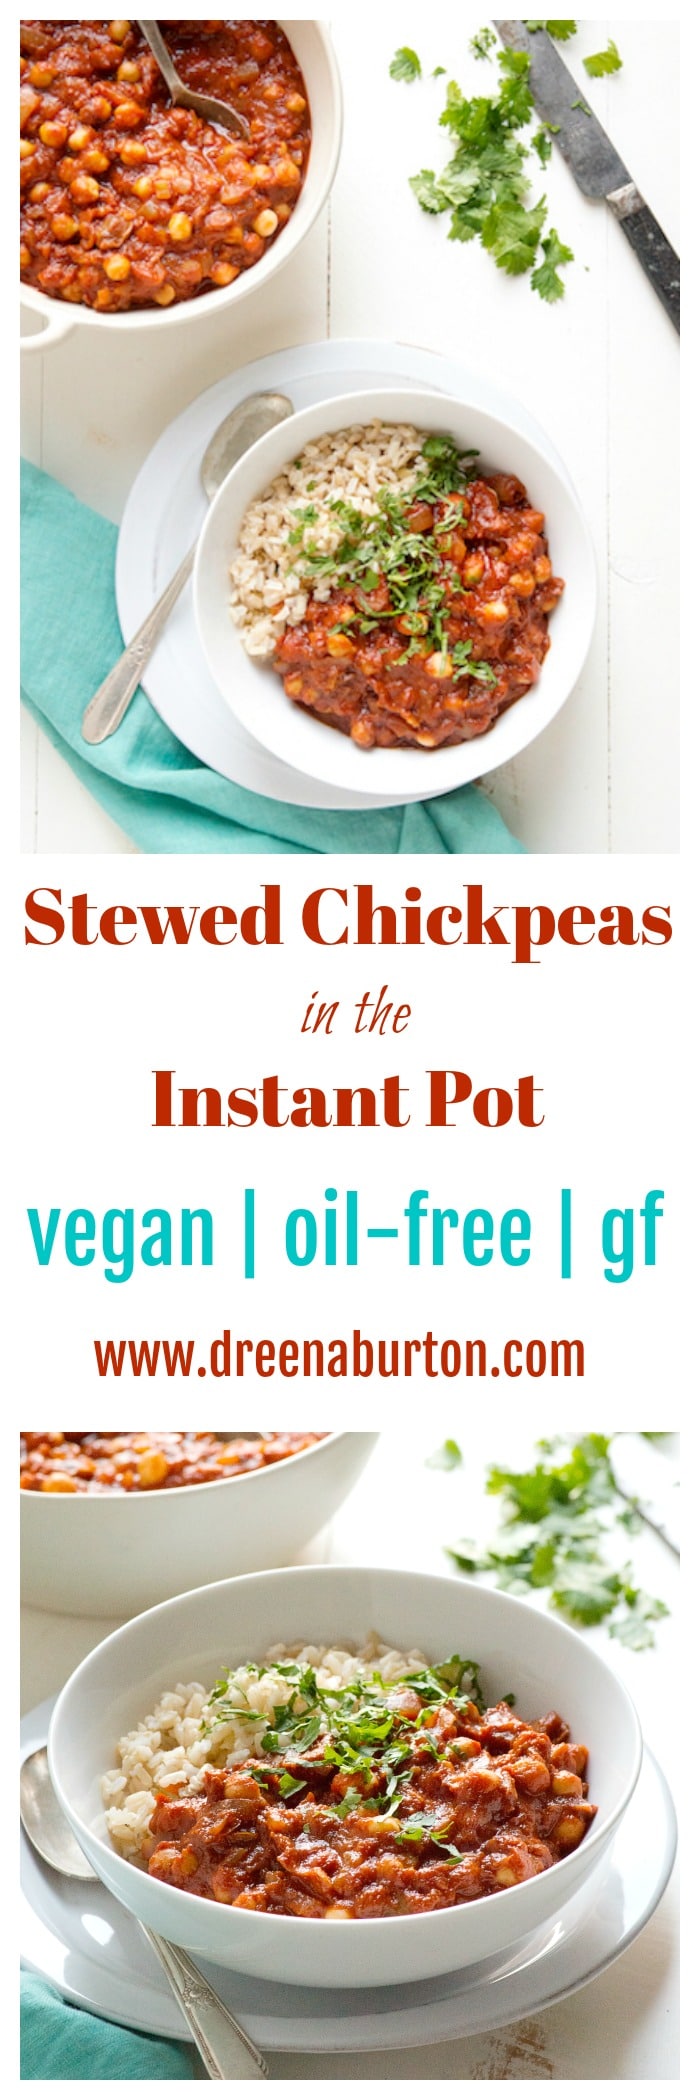 Stewed Chickpeas in the Instant Pot (stovetop method too) | healthy chickpea recipes | healthy instant pot recipes | instant pot meal ideas | vegan instant pot recipes | oil free instant pot recipes | gluten free instant pot recipes | vegan chickpea recipes | gluten free chickpea recipes | vegan dinner recipes || Plant Powered Kitchen